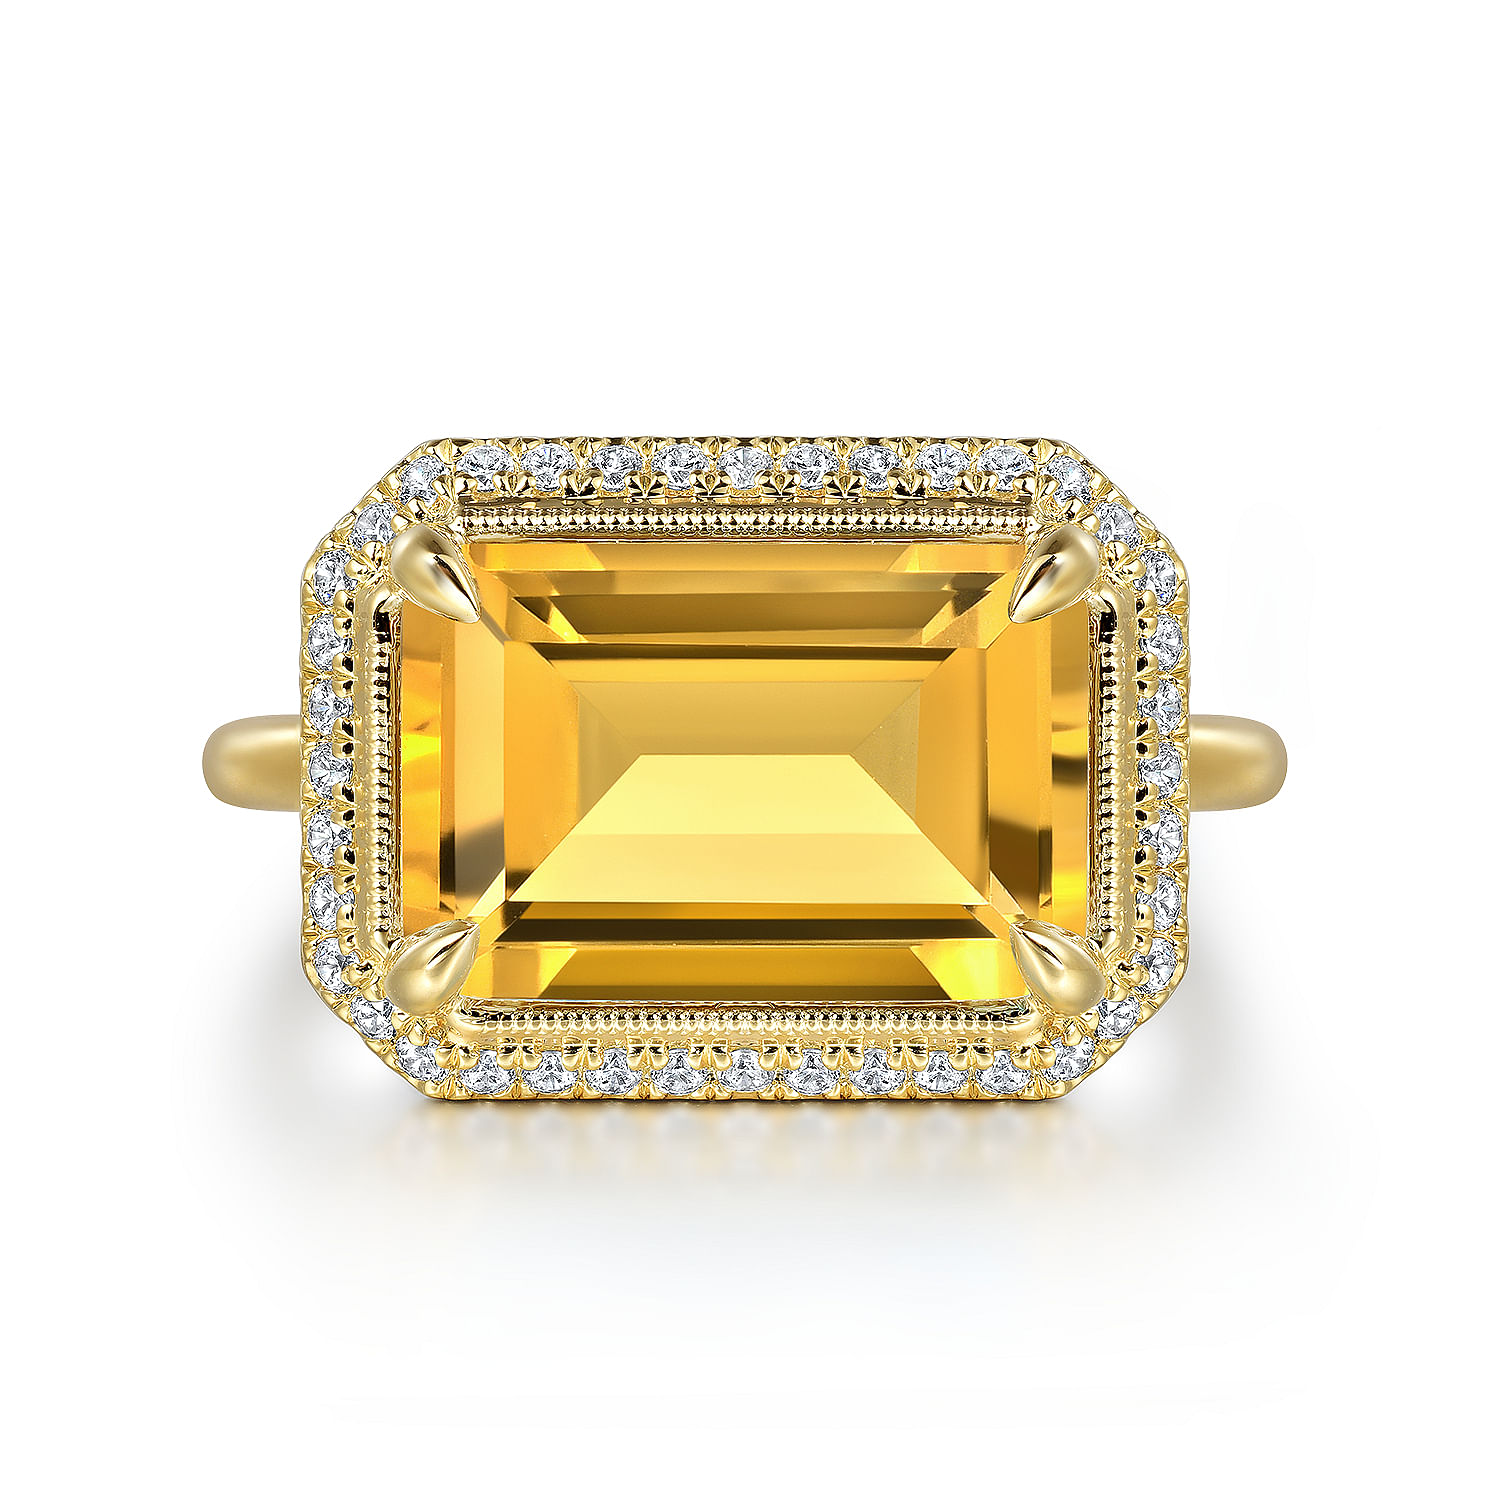 Gabriel - 14K Yellow Gold Diamond and Citrine Emerald Cut Ladies Ring With Flower Pattern Gallery